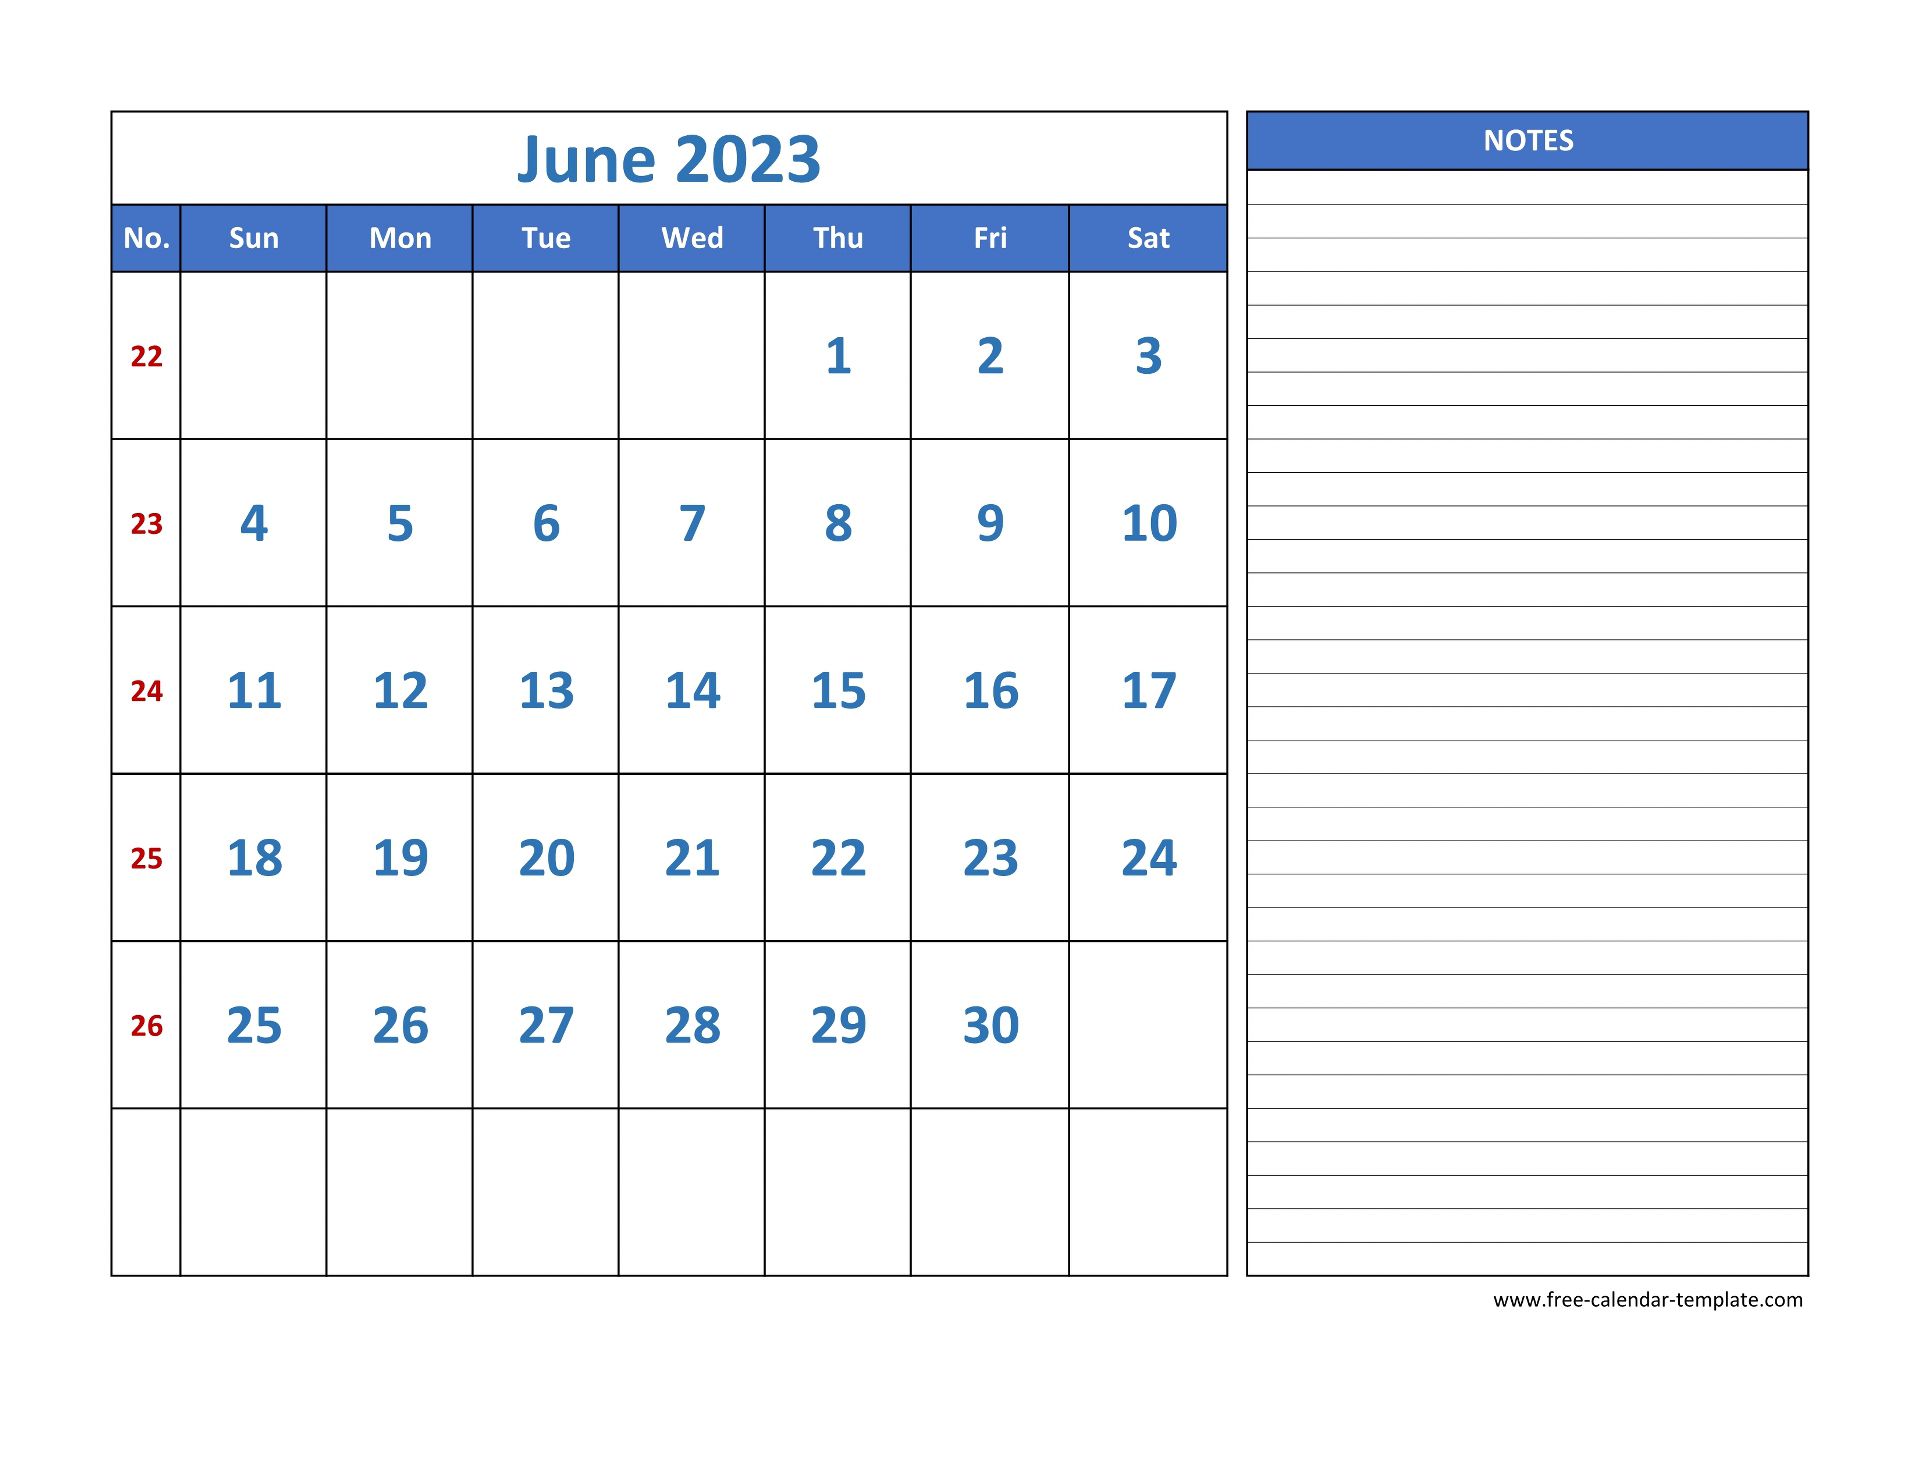 june-calendar-2023-grid-lines-for-holidays-and-notes-horizontal